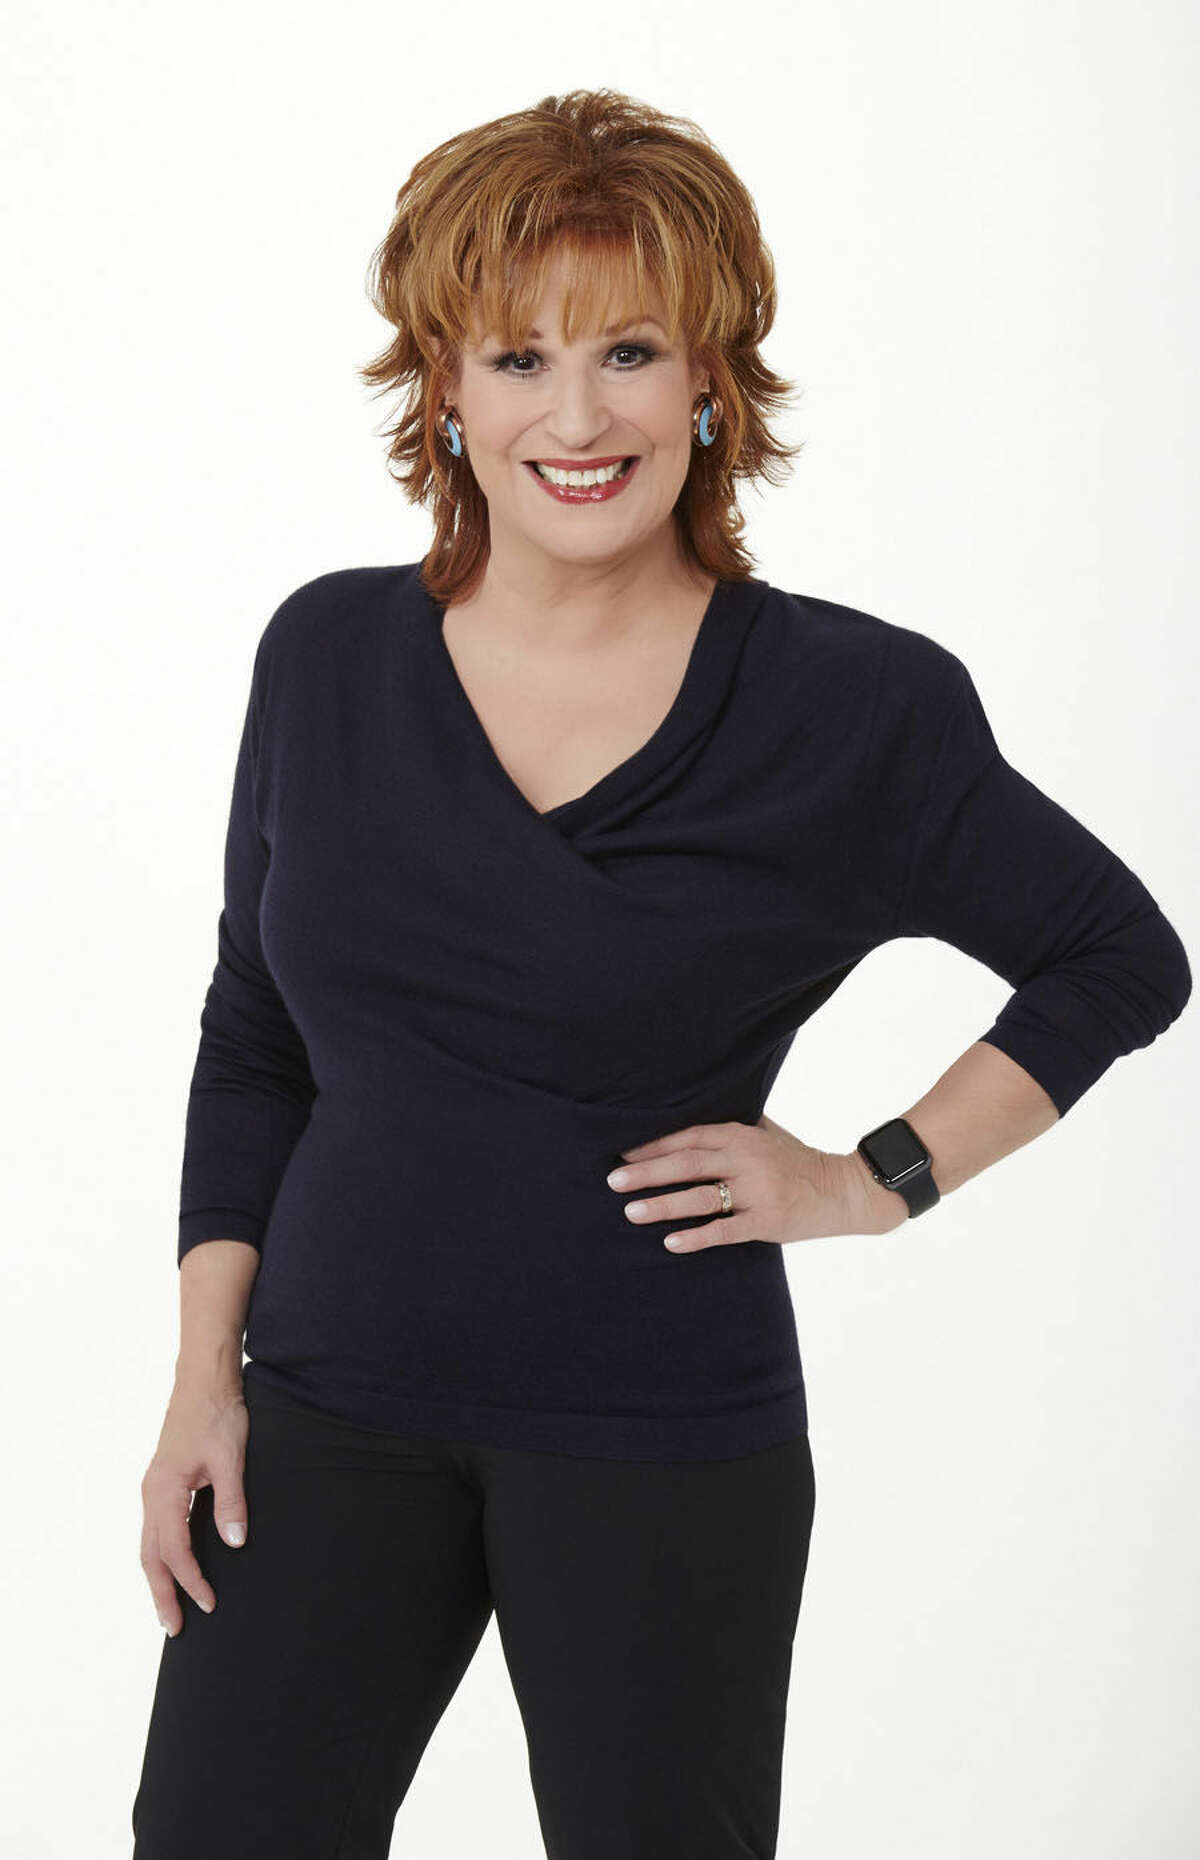 Joy Behar is a co-host on ABC's "The View." "The View" airs Monday-Friday (11:00 am-12:00 pm, ET) on the ABC Television Network. 